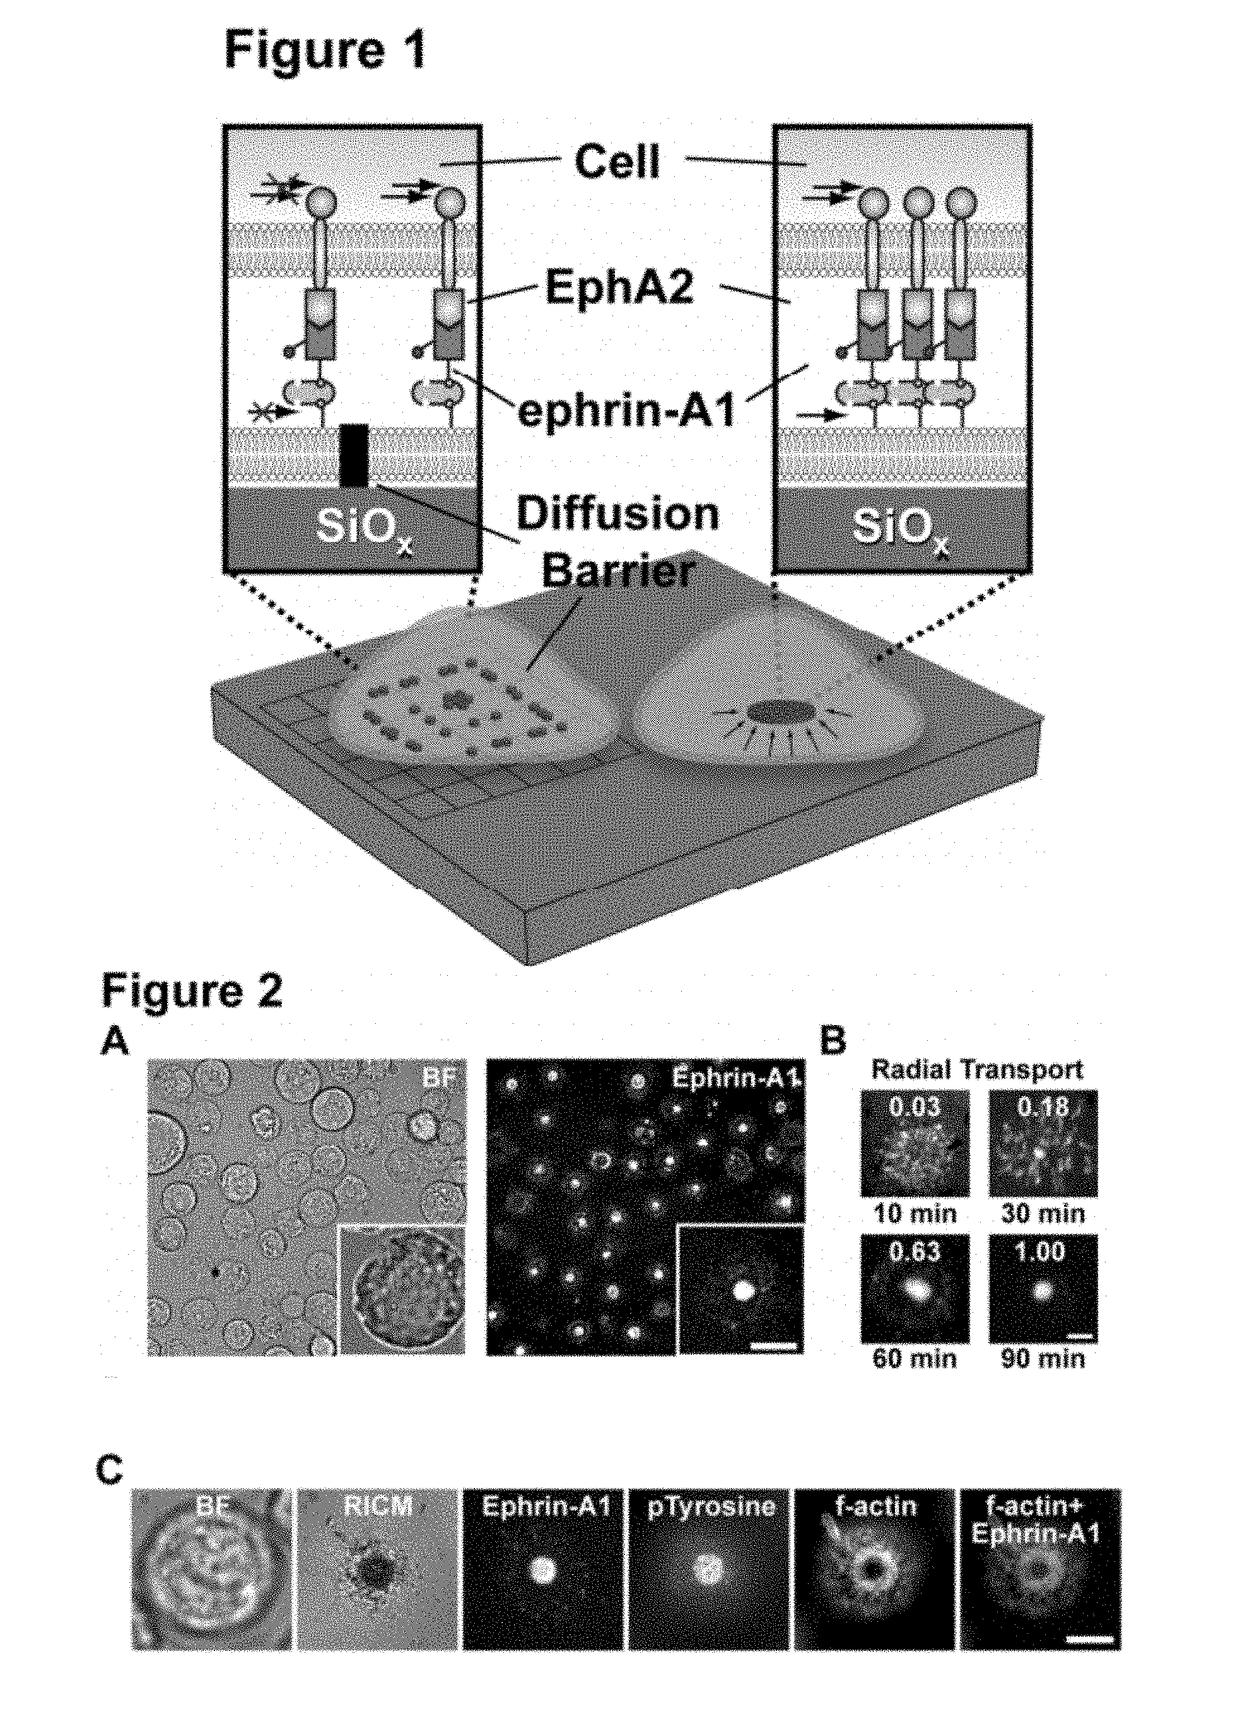 Spatial biomarker of disease and detection of spatial organization of cellular receptors